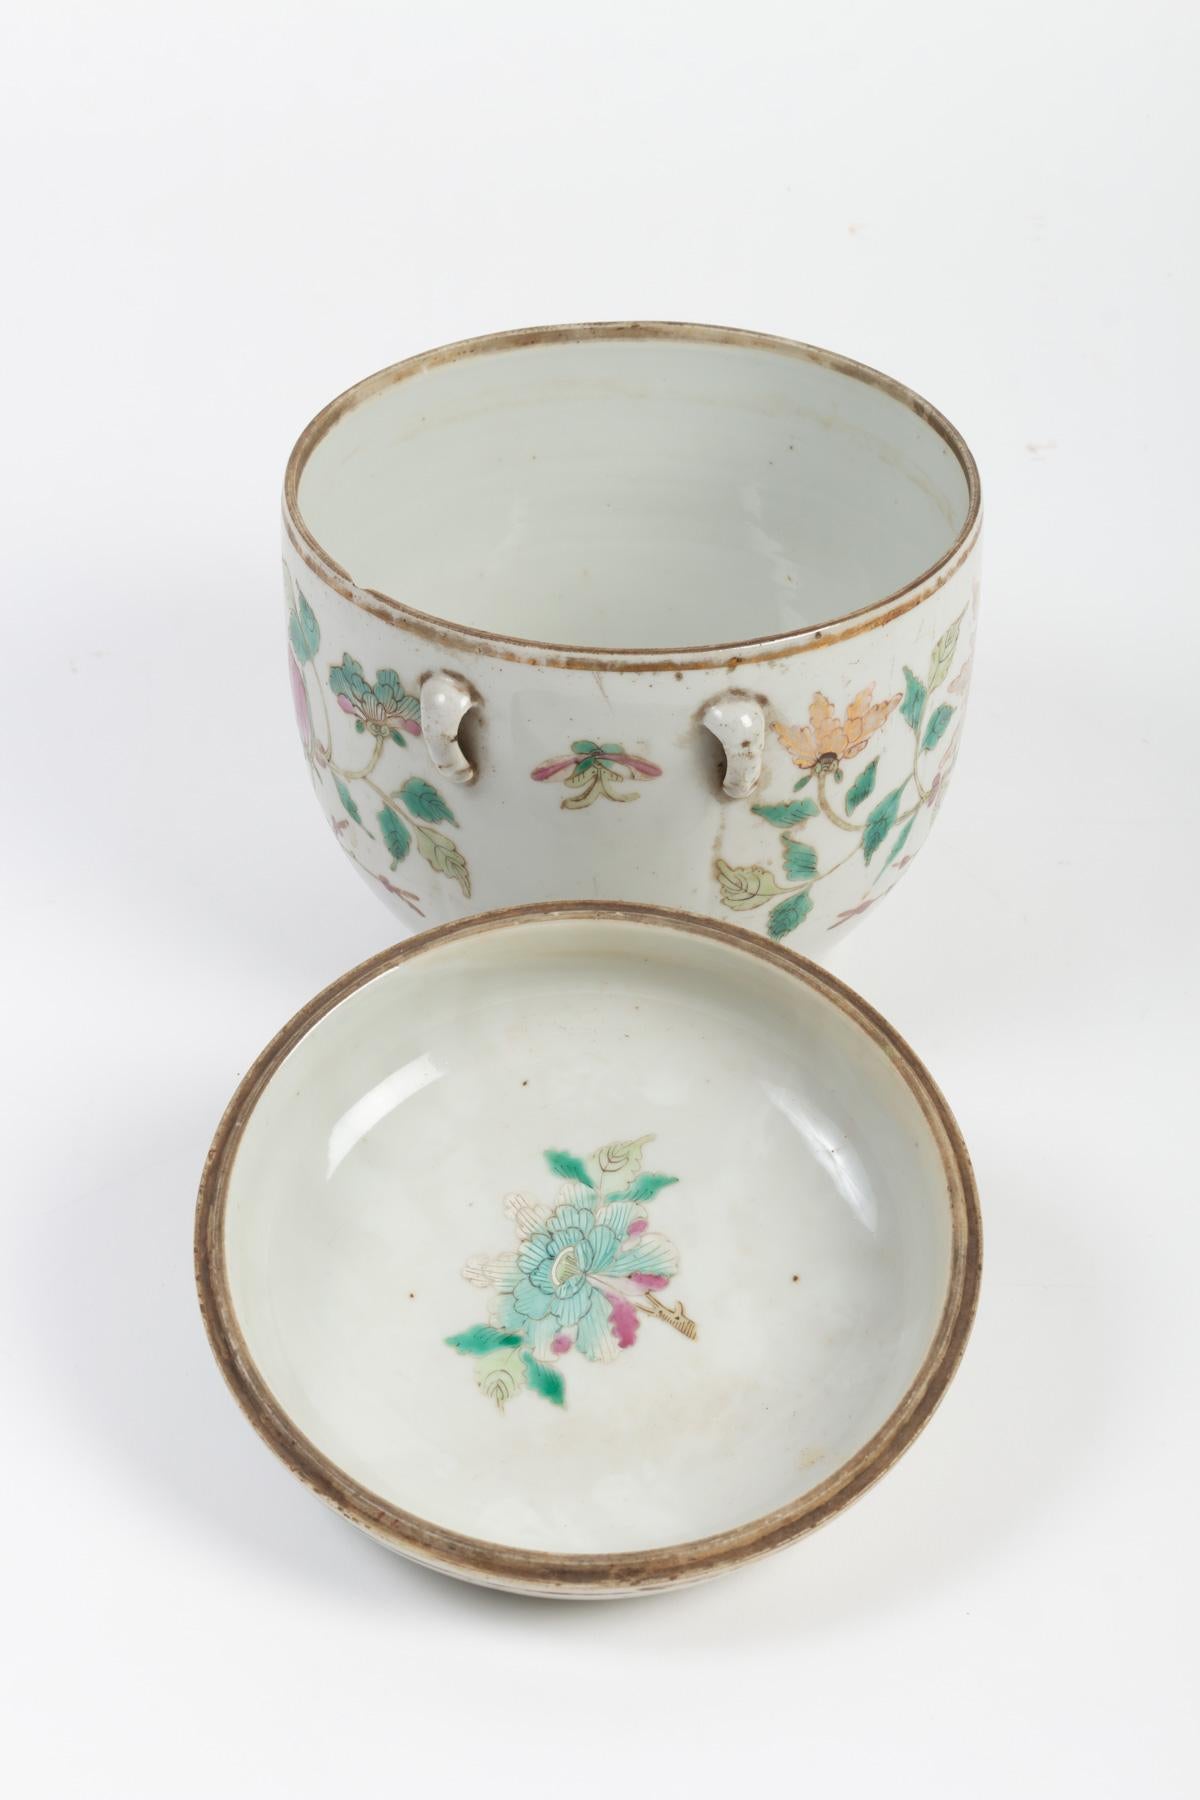 Porcelain Covered Pot China, End of the 19th Century